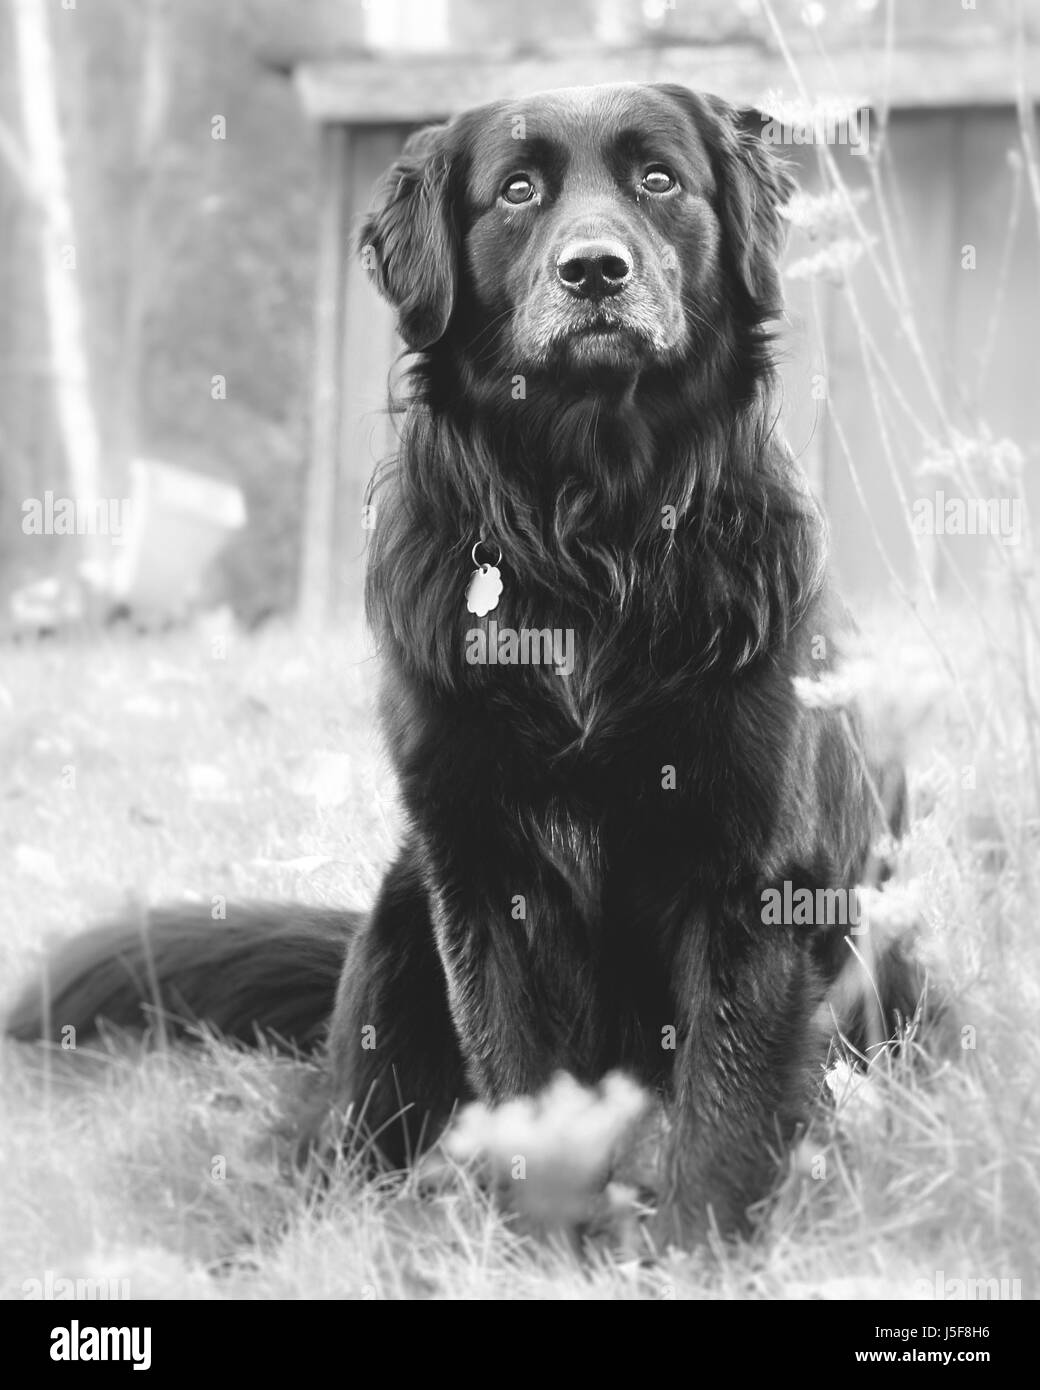 Black dog with serious look on his face waits looking lost and forlorn in Upstate New York. Stock Photo